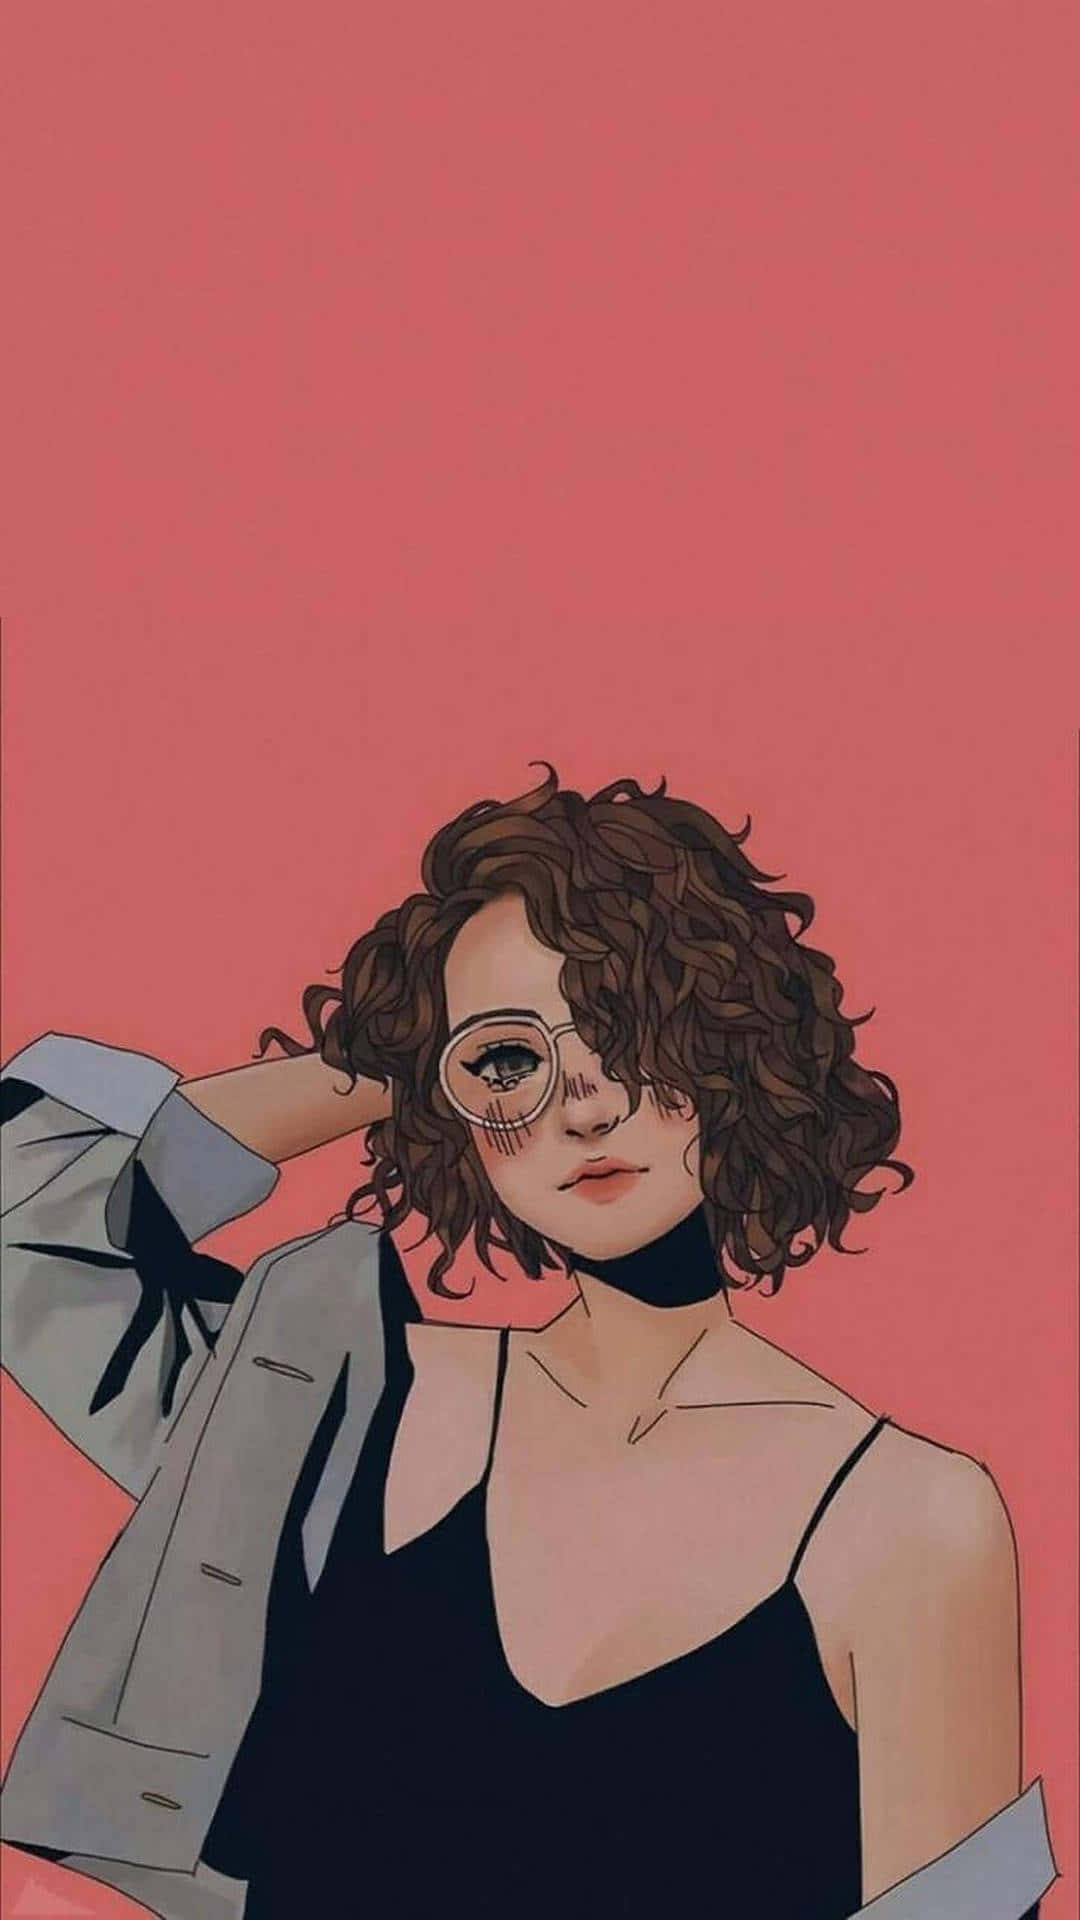 Stylish Curly Haired Girl Illustration Wallpaper